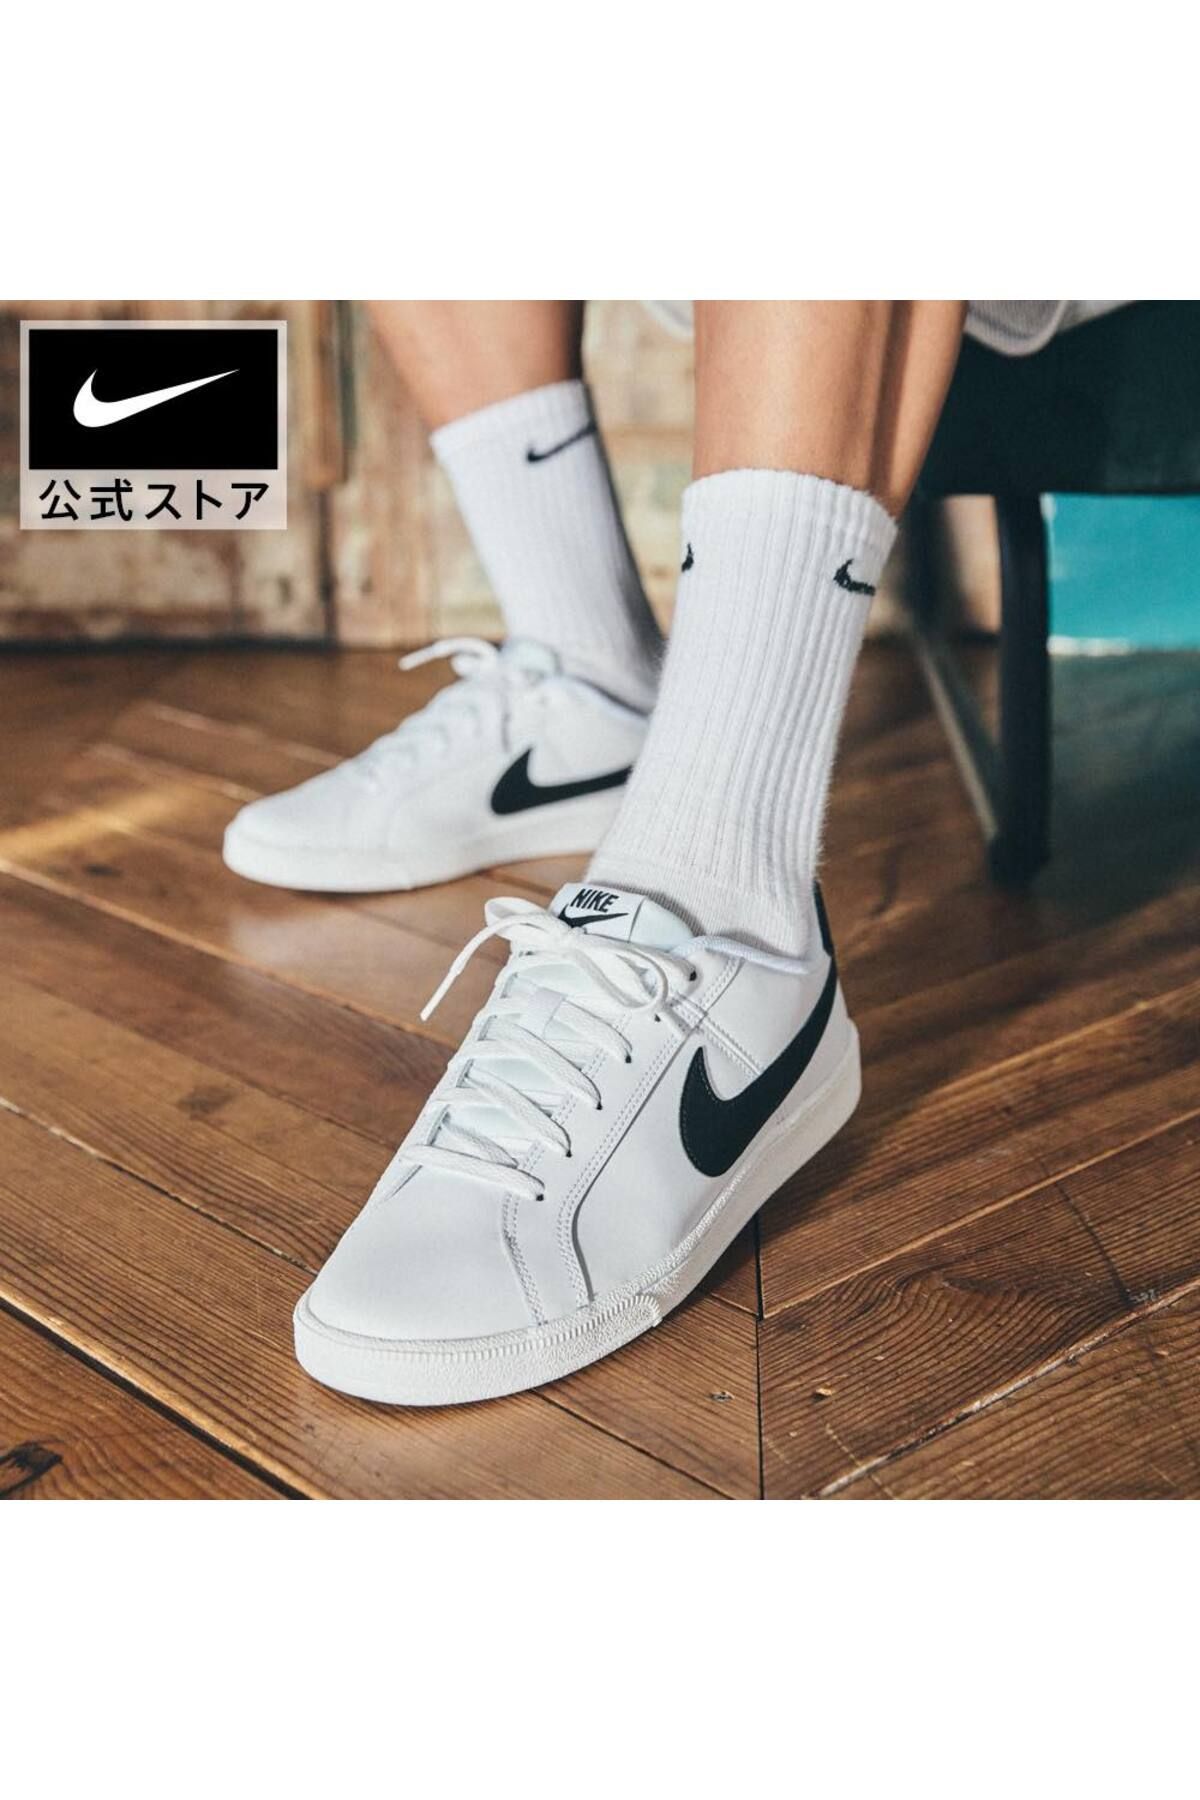 Nike Court Royale Black/White Mens Sneakers CNG-STORE